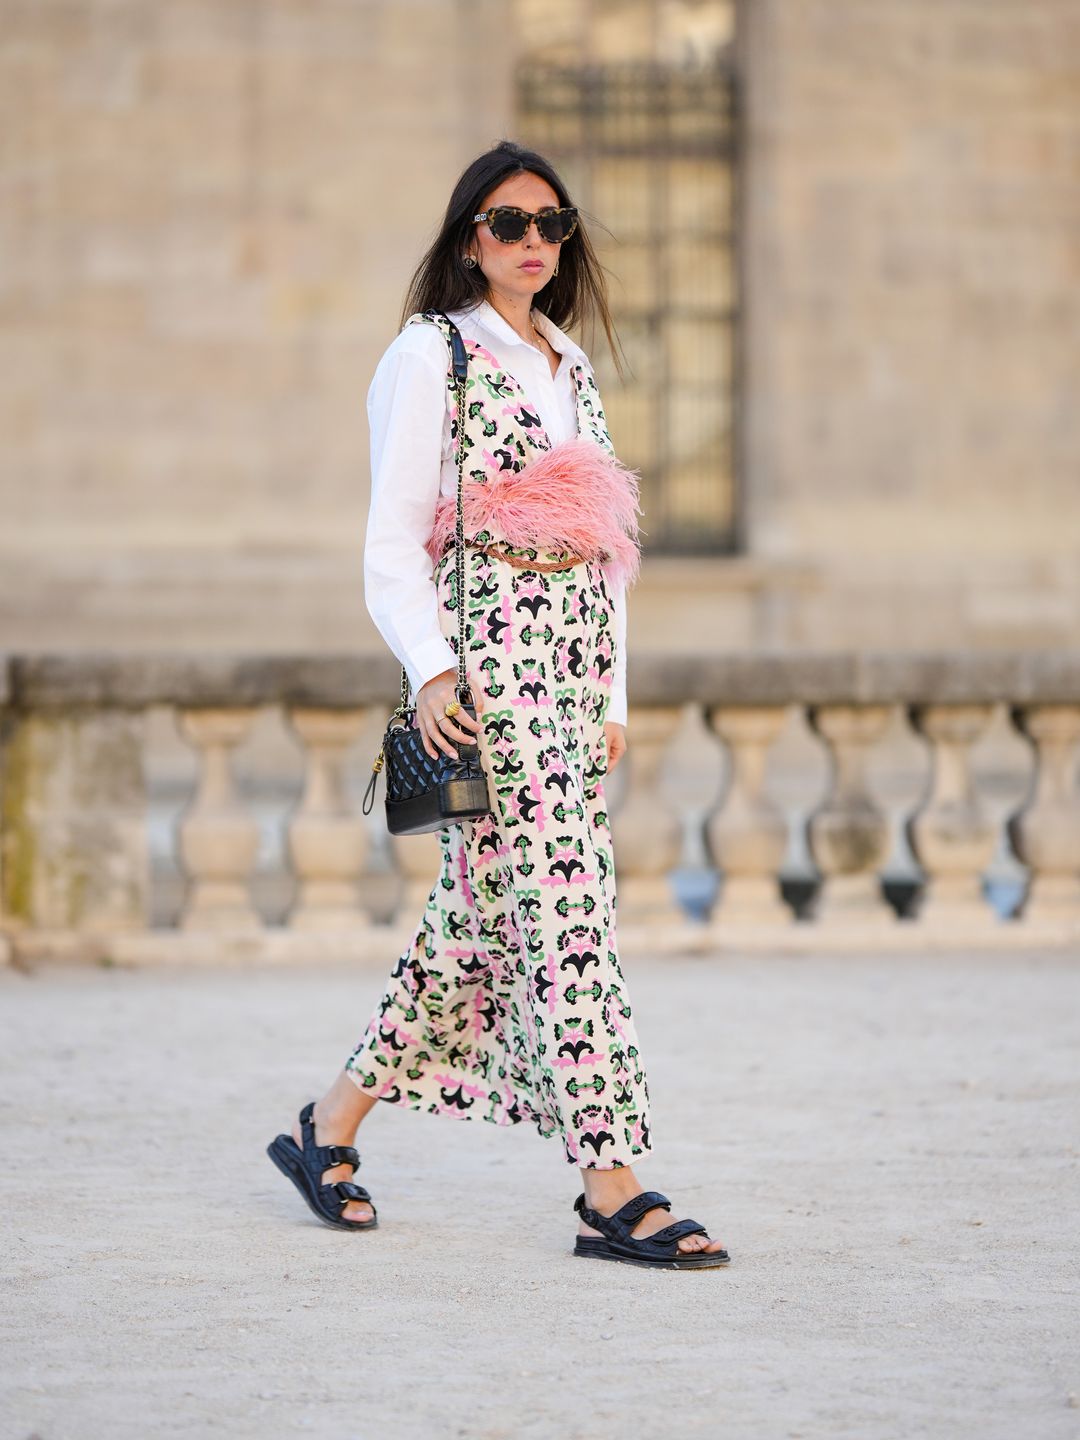 Gabriella Berdugo wears printed dress with pink feather waist detail over white shirt 